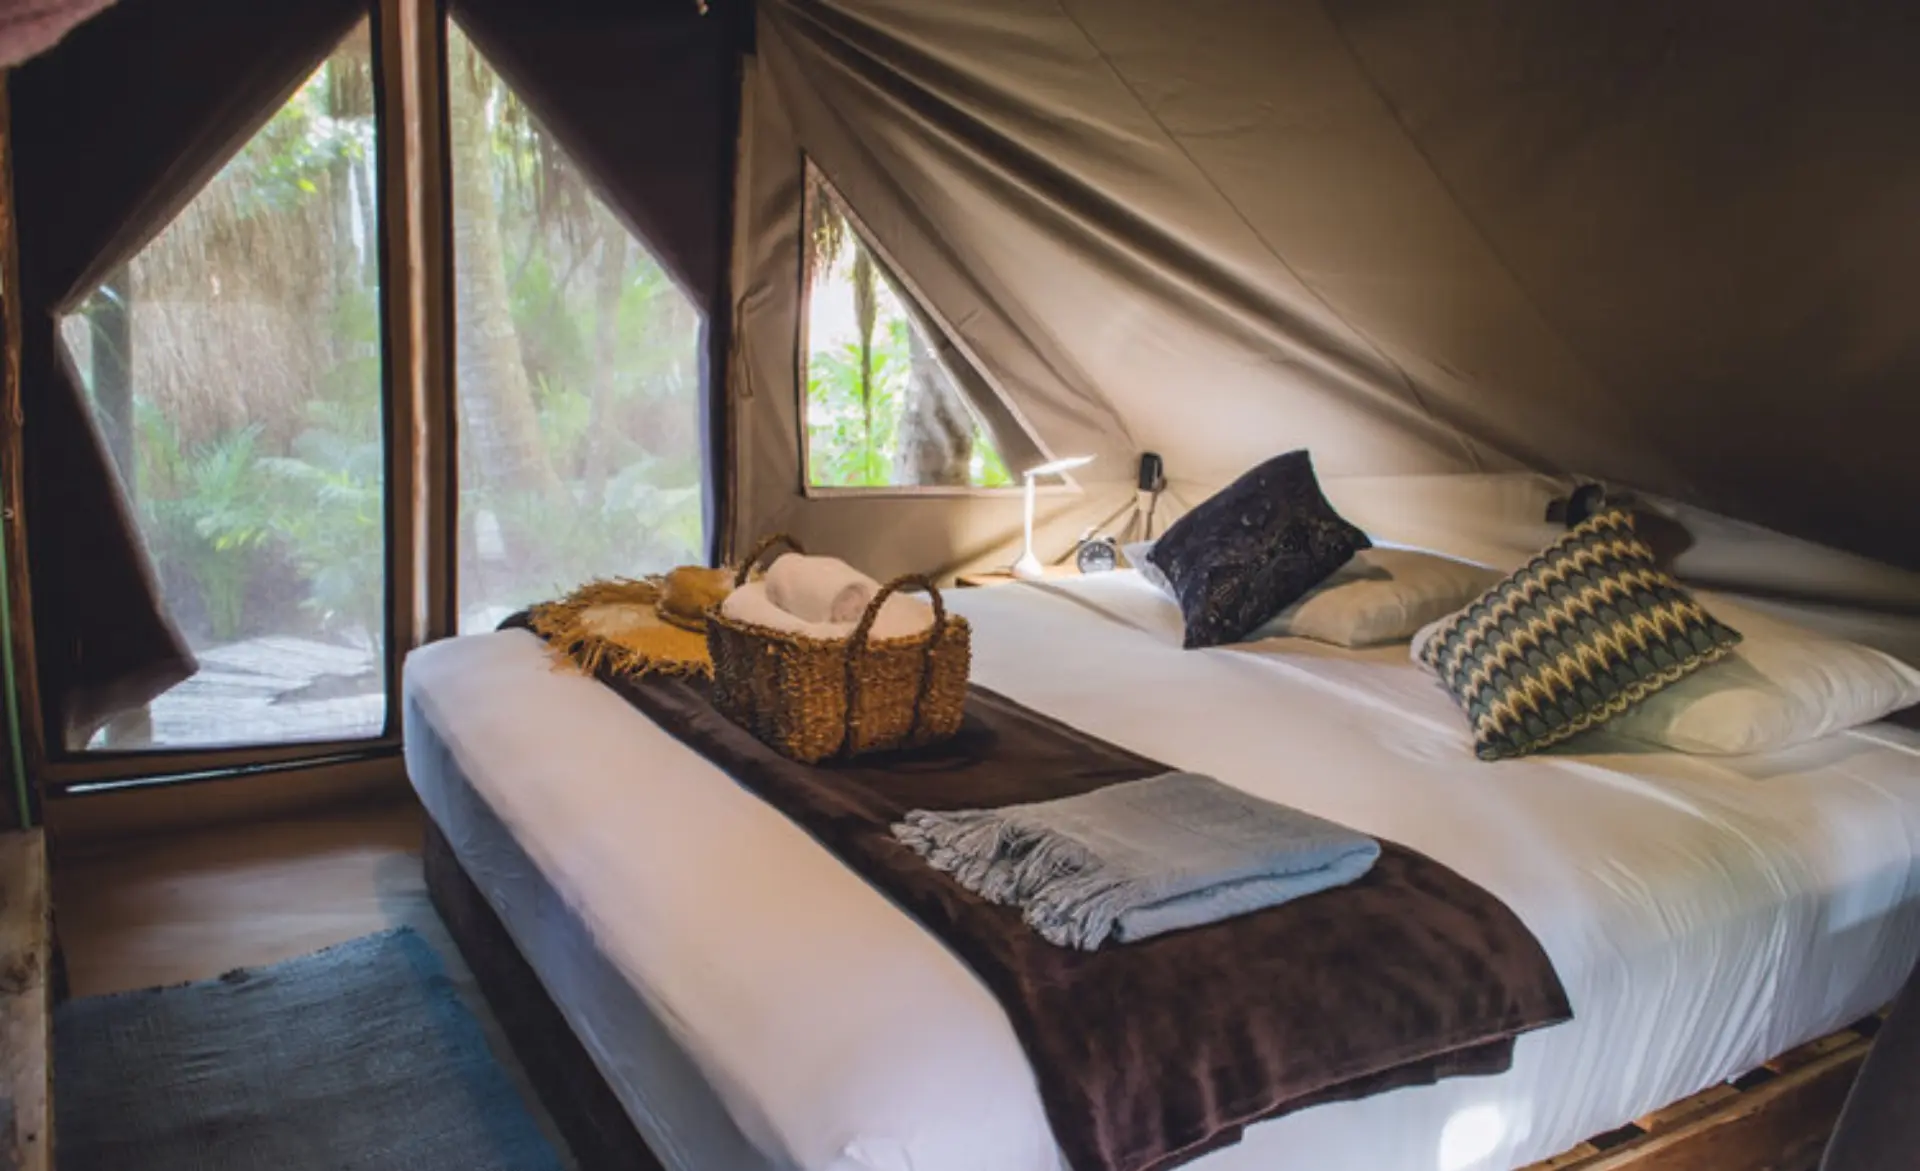 Glamping Mexico